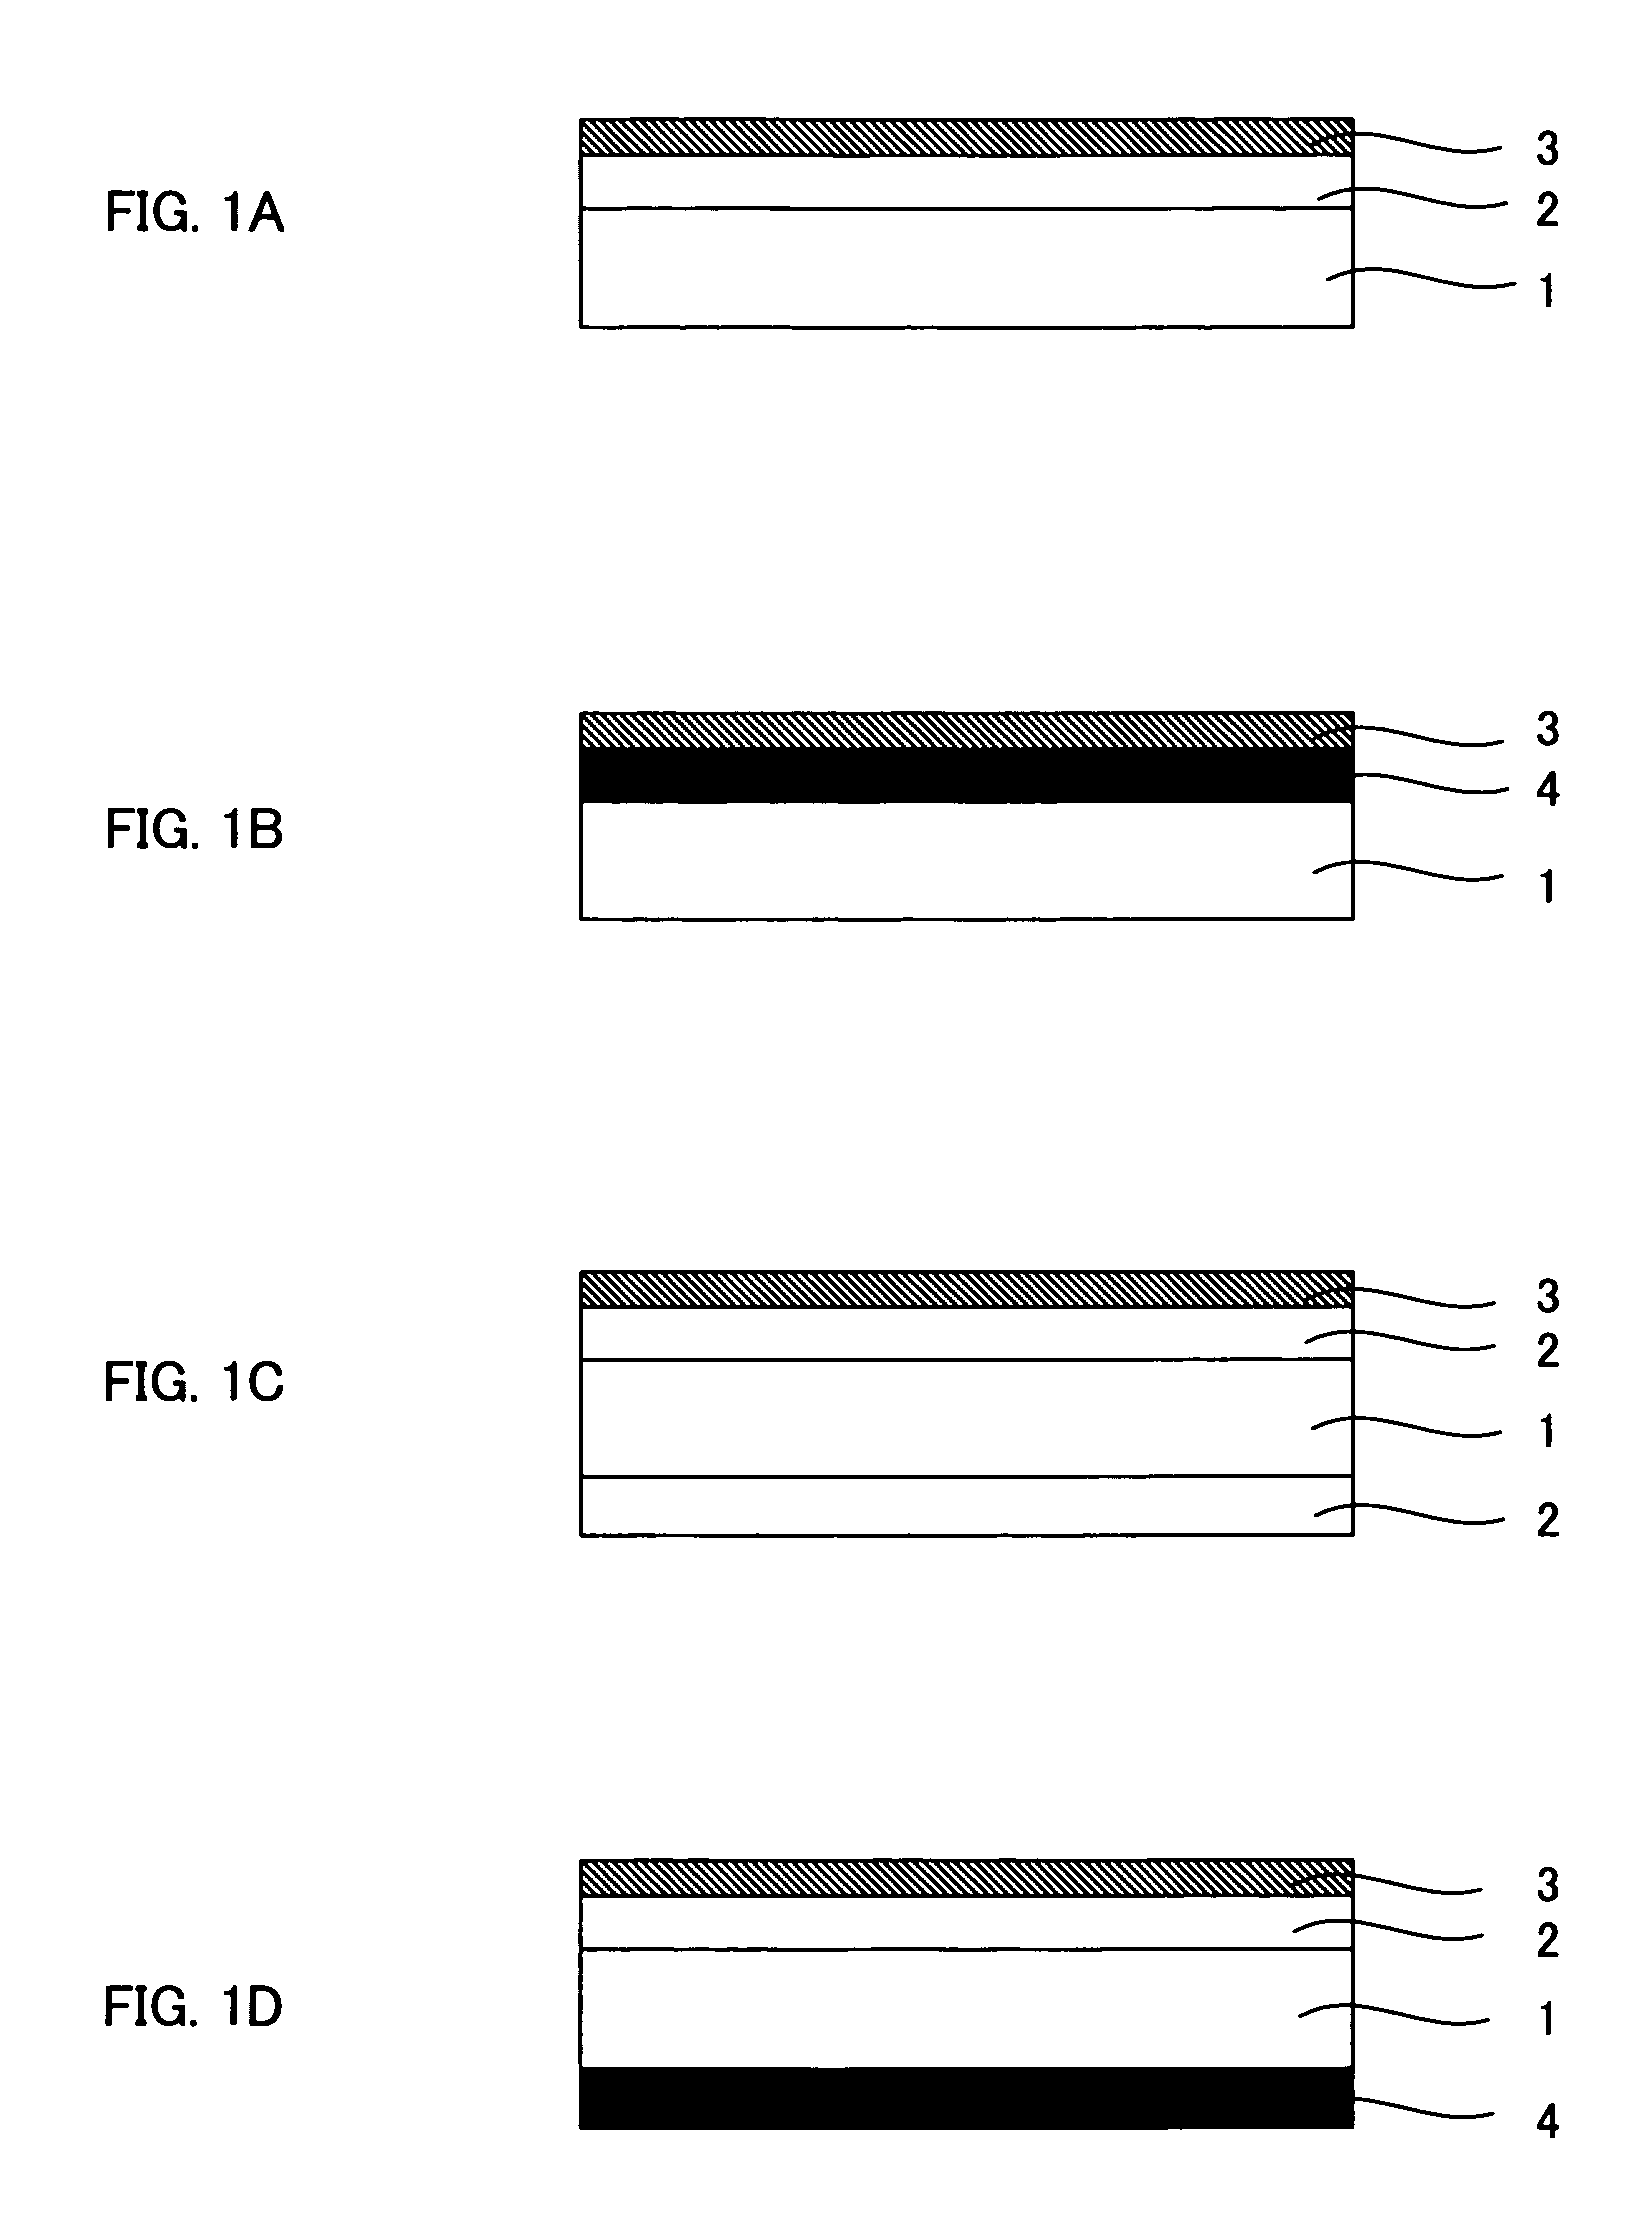 Substrate for bio-microarray and bio-microarray